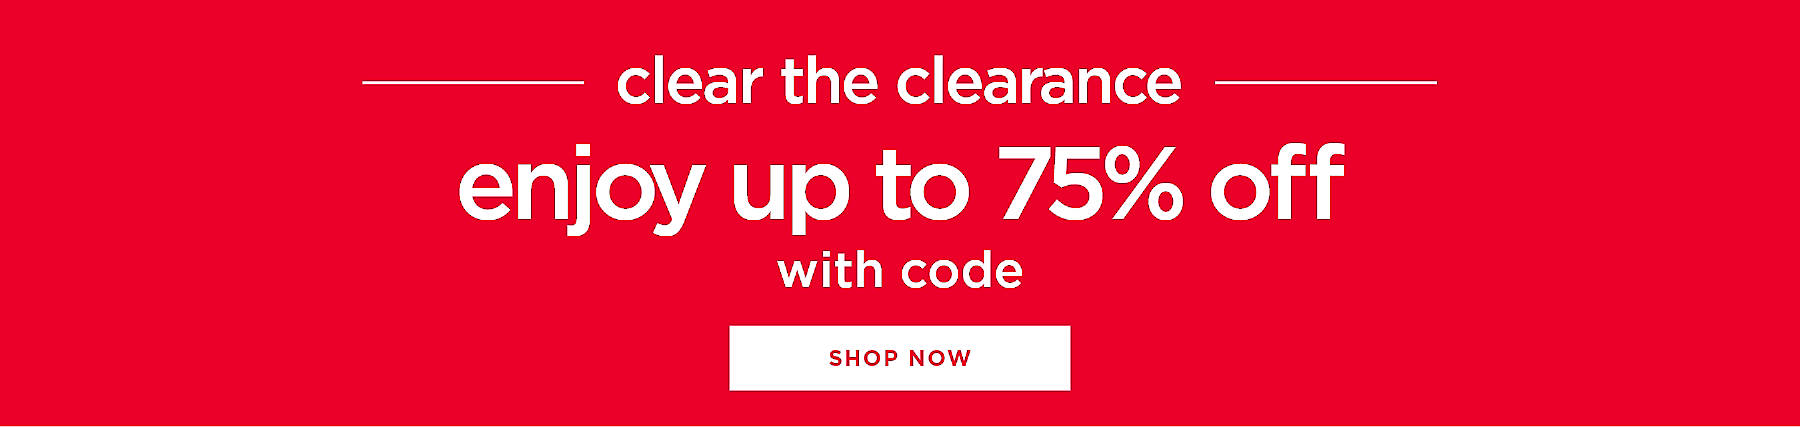 clear the clearance enjoy up to 75% off with code shop now